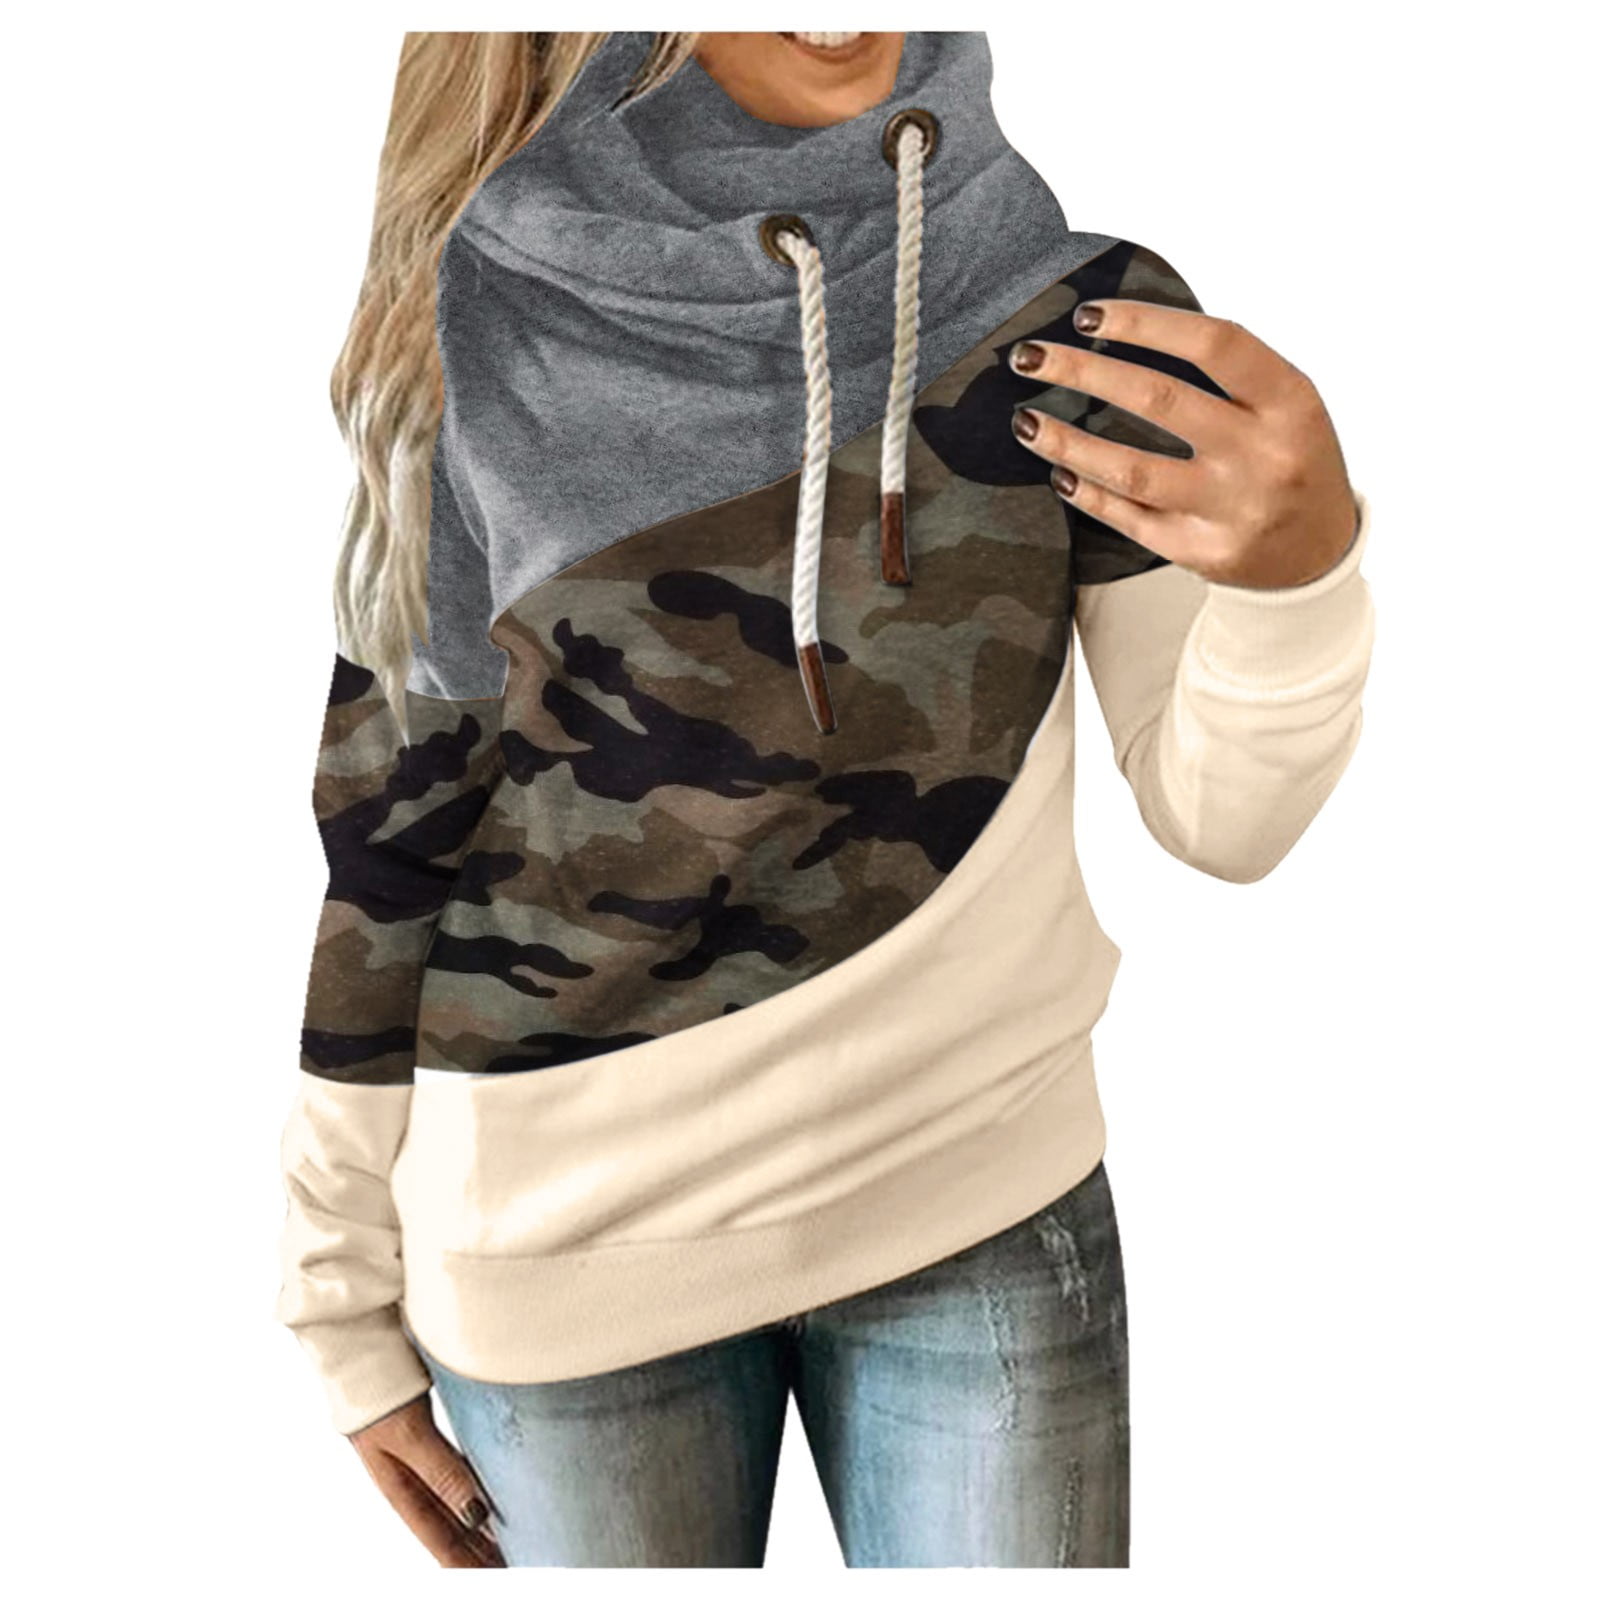 HSMQHJWE Same Day Delivery Items Prime Clothes Turtle Necks For Womens Long  Sleeve Pack Sleeve Print Long Hoodie Sweatshirt Women'S Women'S Blouse